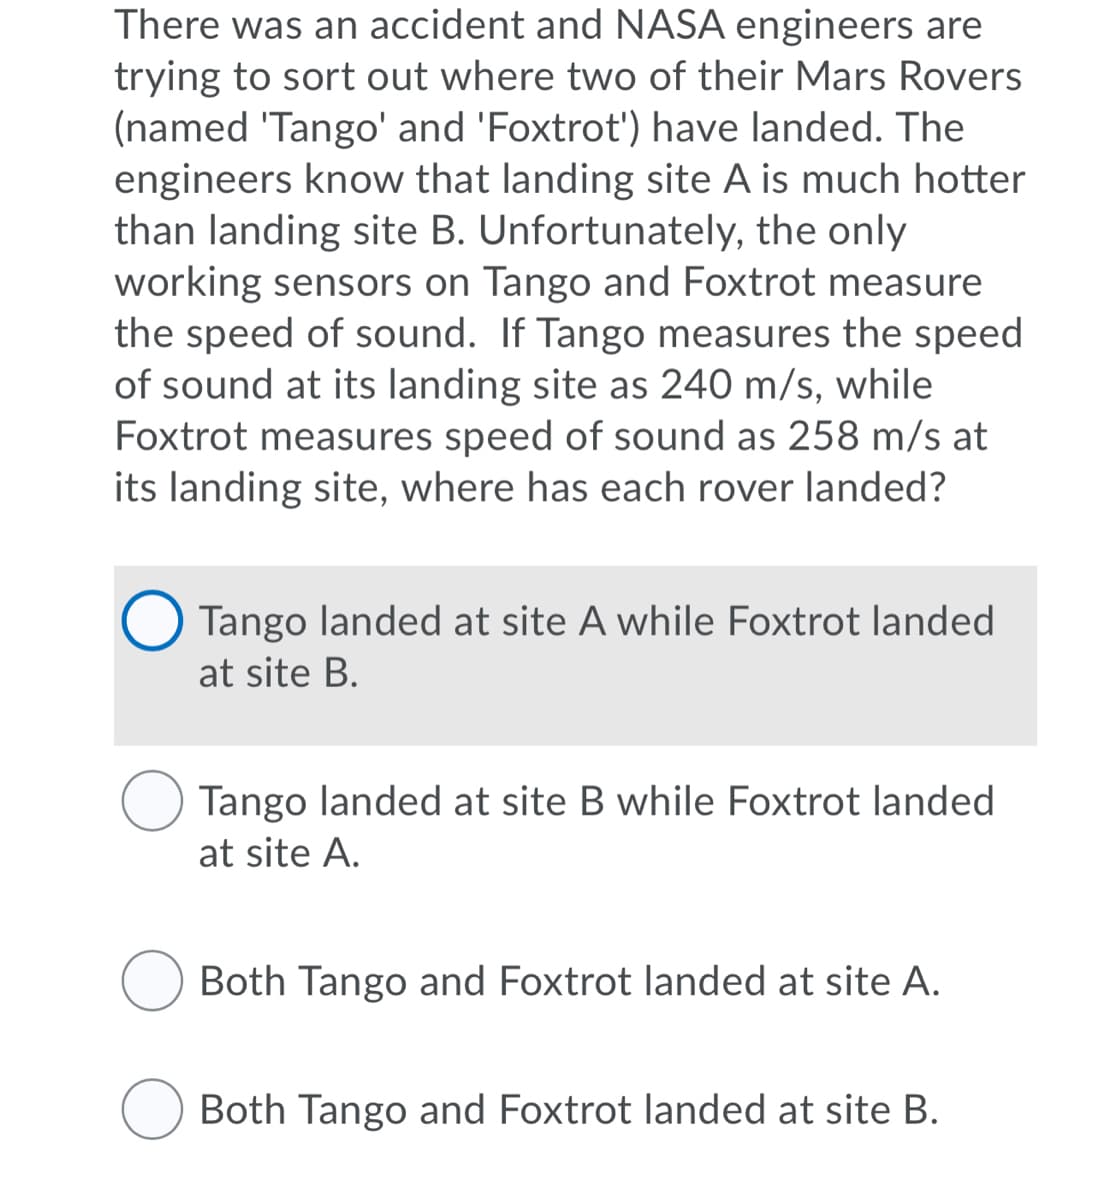 There was an accident and NASA engineers are
trying to sort out where two of their Mars Rovers
(named 'Tango' and 'Foxtrot') have landed. The
engineers know that landing site A is much hotter
than landing site B. Unfortunately, the only
working sensors on Tango and Foxtrot measure
the speed of sound. If Tango measures the speed
of sound at its landing site as 240 m/s, while
Foxtrot measures speed of sound as 258 m/s at
its landing site, where has each rover landed?
Tango landed at site A while Foxtrot landed
at site B.
Tango landed at site B while Foxtrot landed
at site A.
Both Tango and Foxtrot landed at site A.
O Both Tango and Foxtrot landed at site B.
